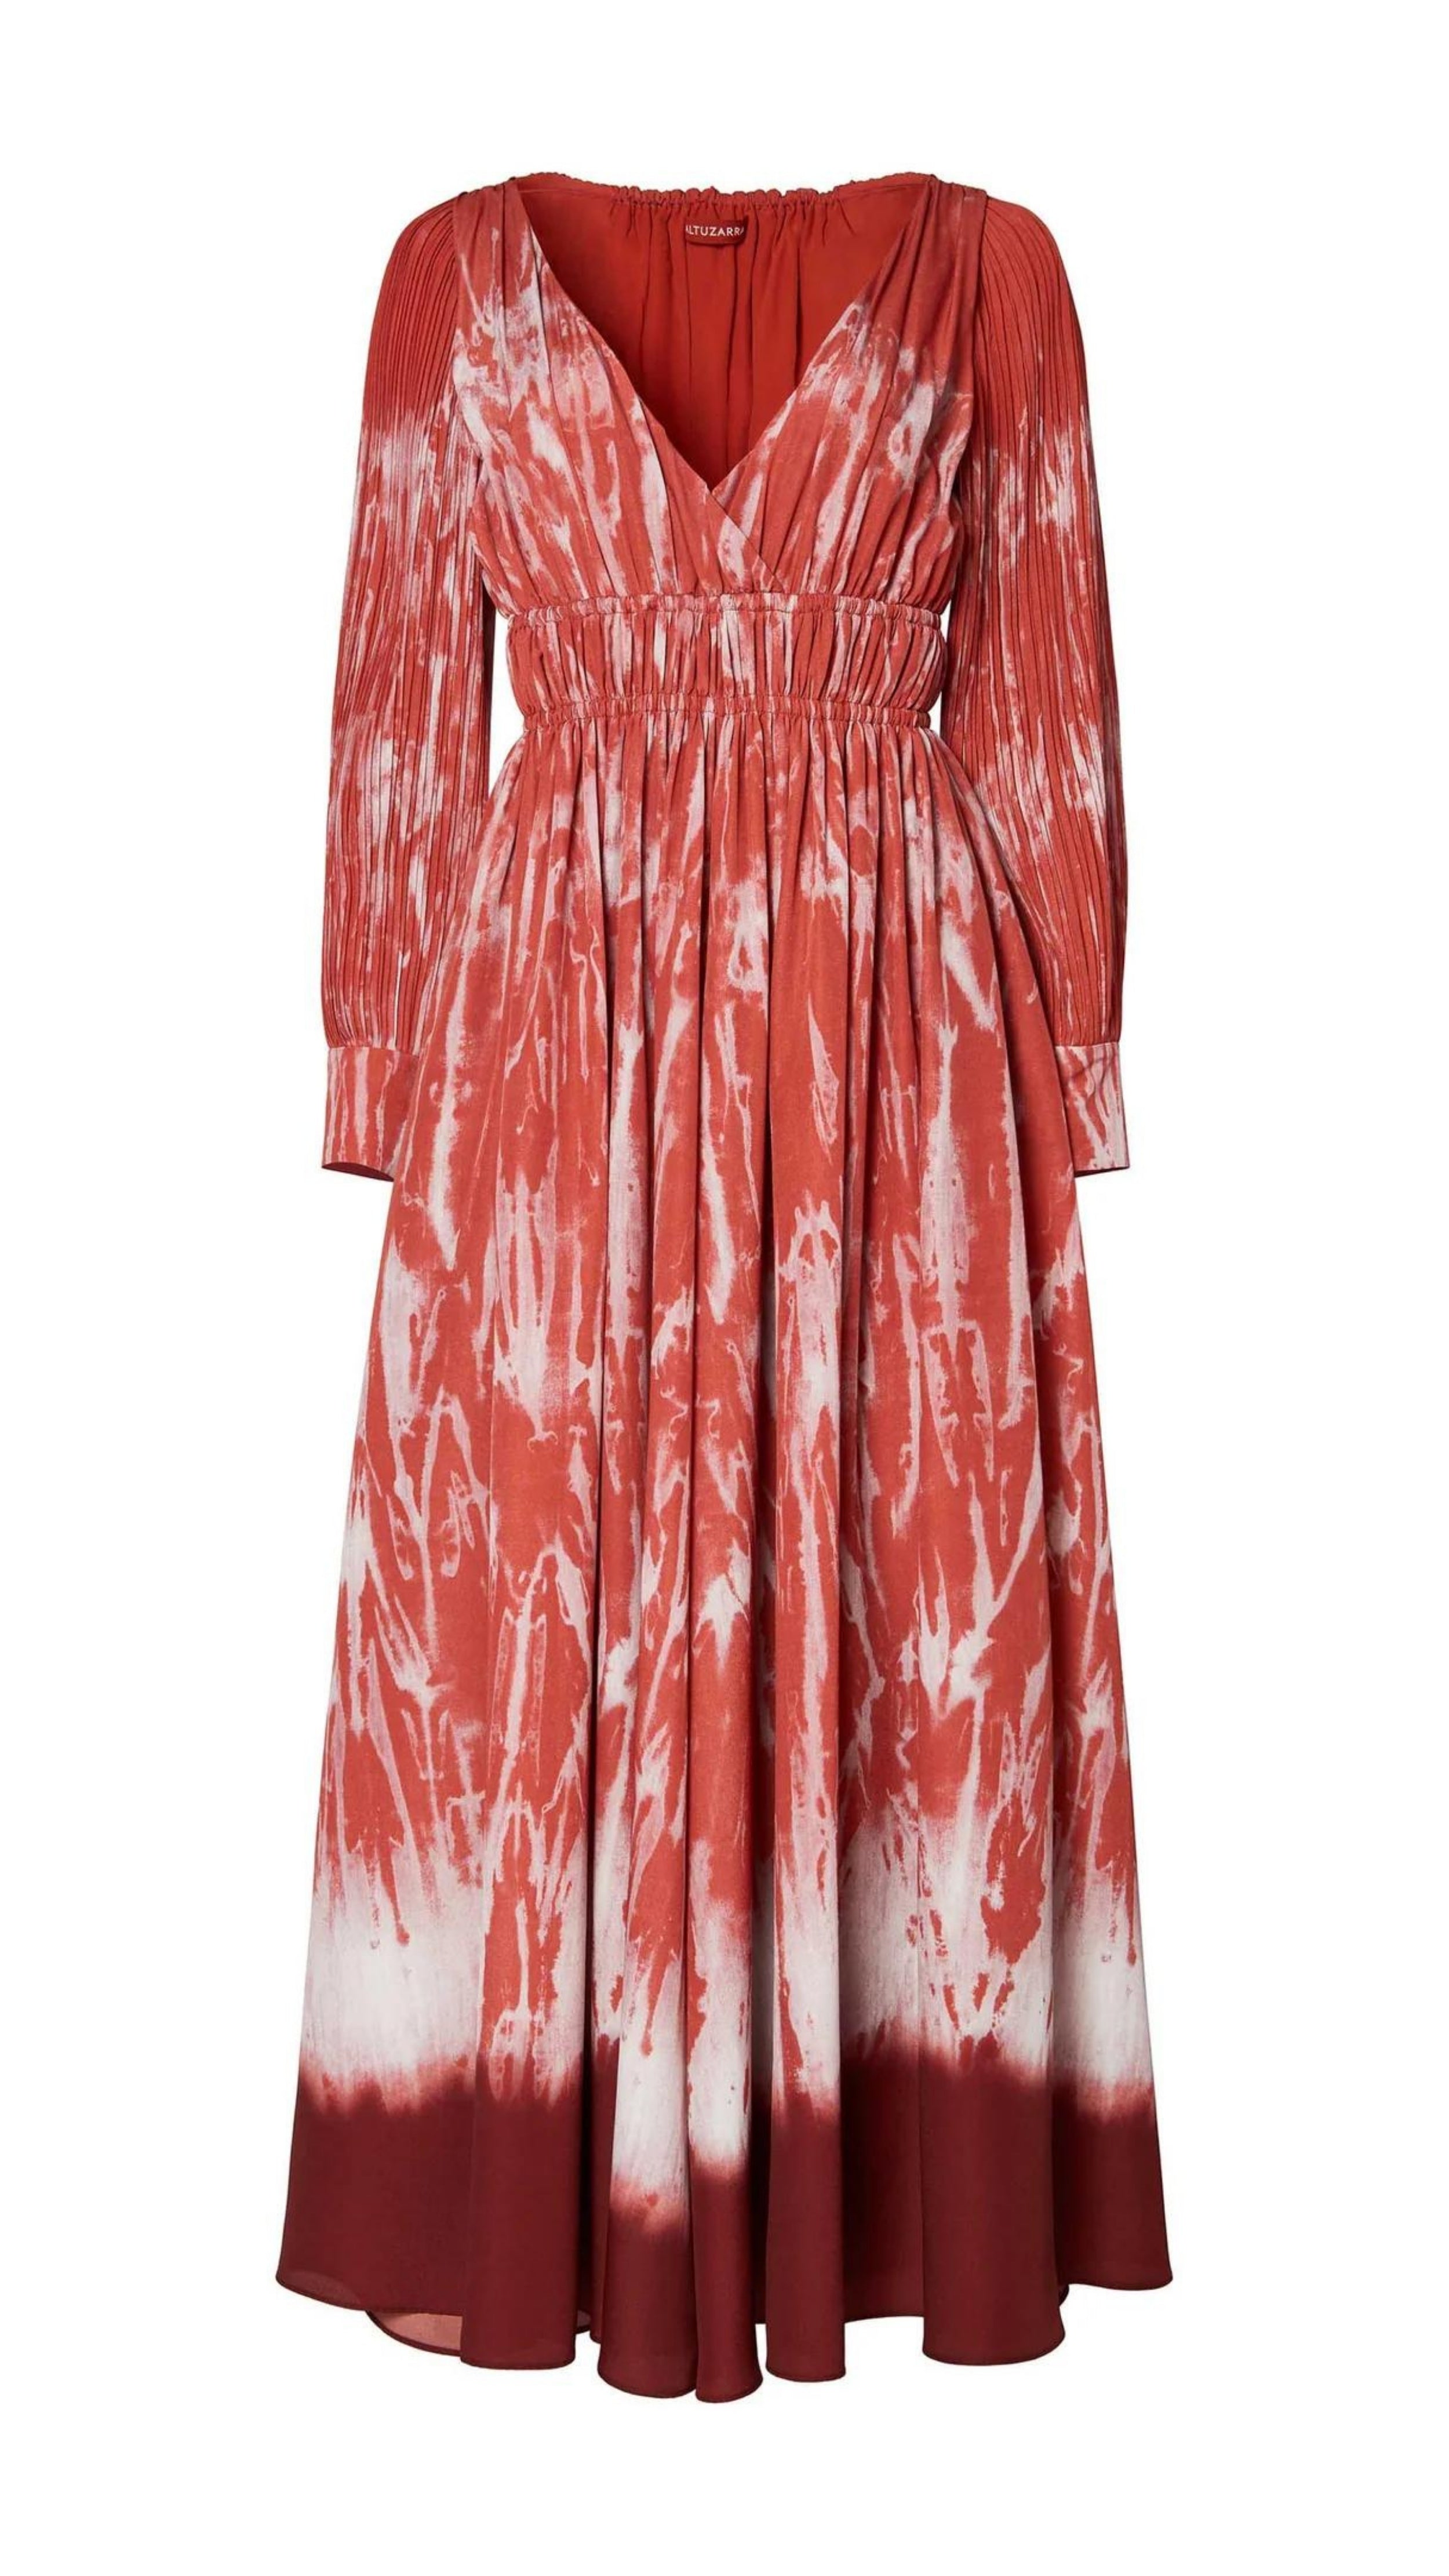 Altuzarra Kathleen Dress The Kathleen Dress is a statement dress using Altuzarra's renowned Shibori dyeing technique in shades of red, cranberry and orange. It has a maxi silhouette, a V-neckline, a ruched waist, long pleated sleeves, and button-fastening cuffs. Product photo flat.